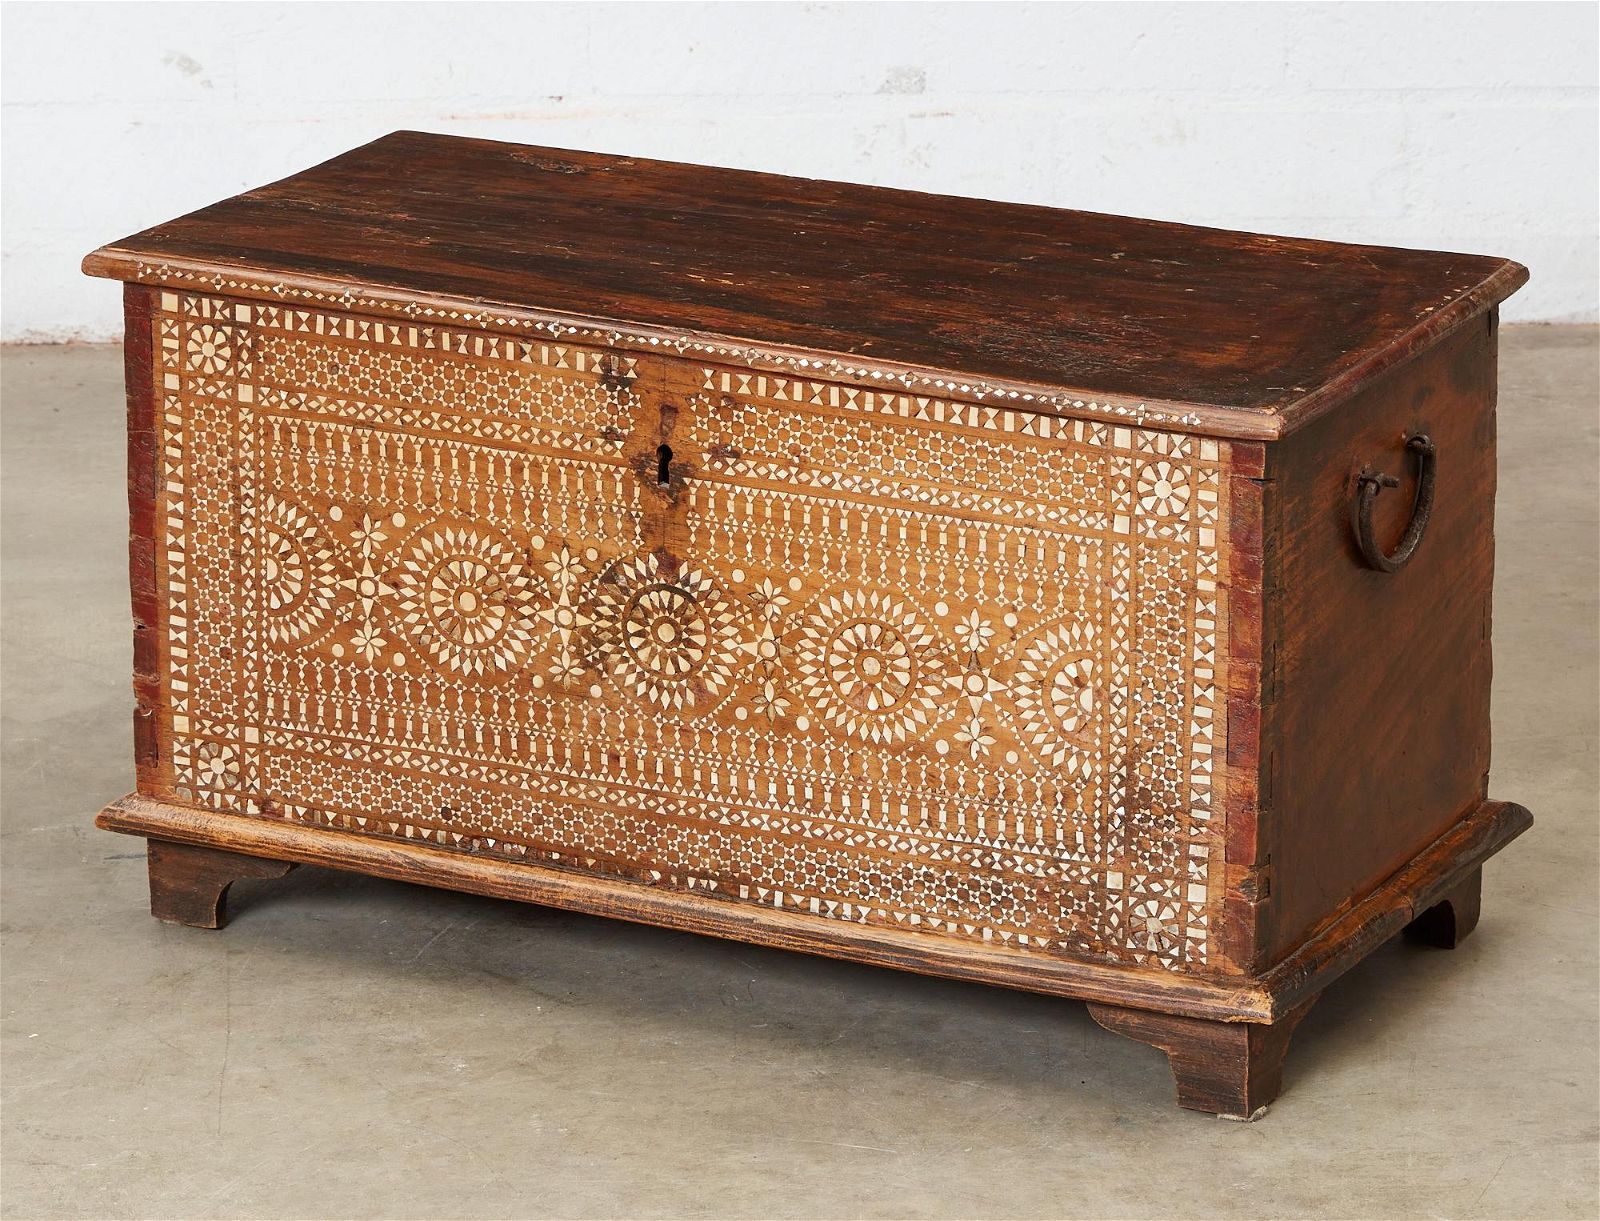 A SMALL ANGLO INDIAN INLAID COFFERA